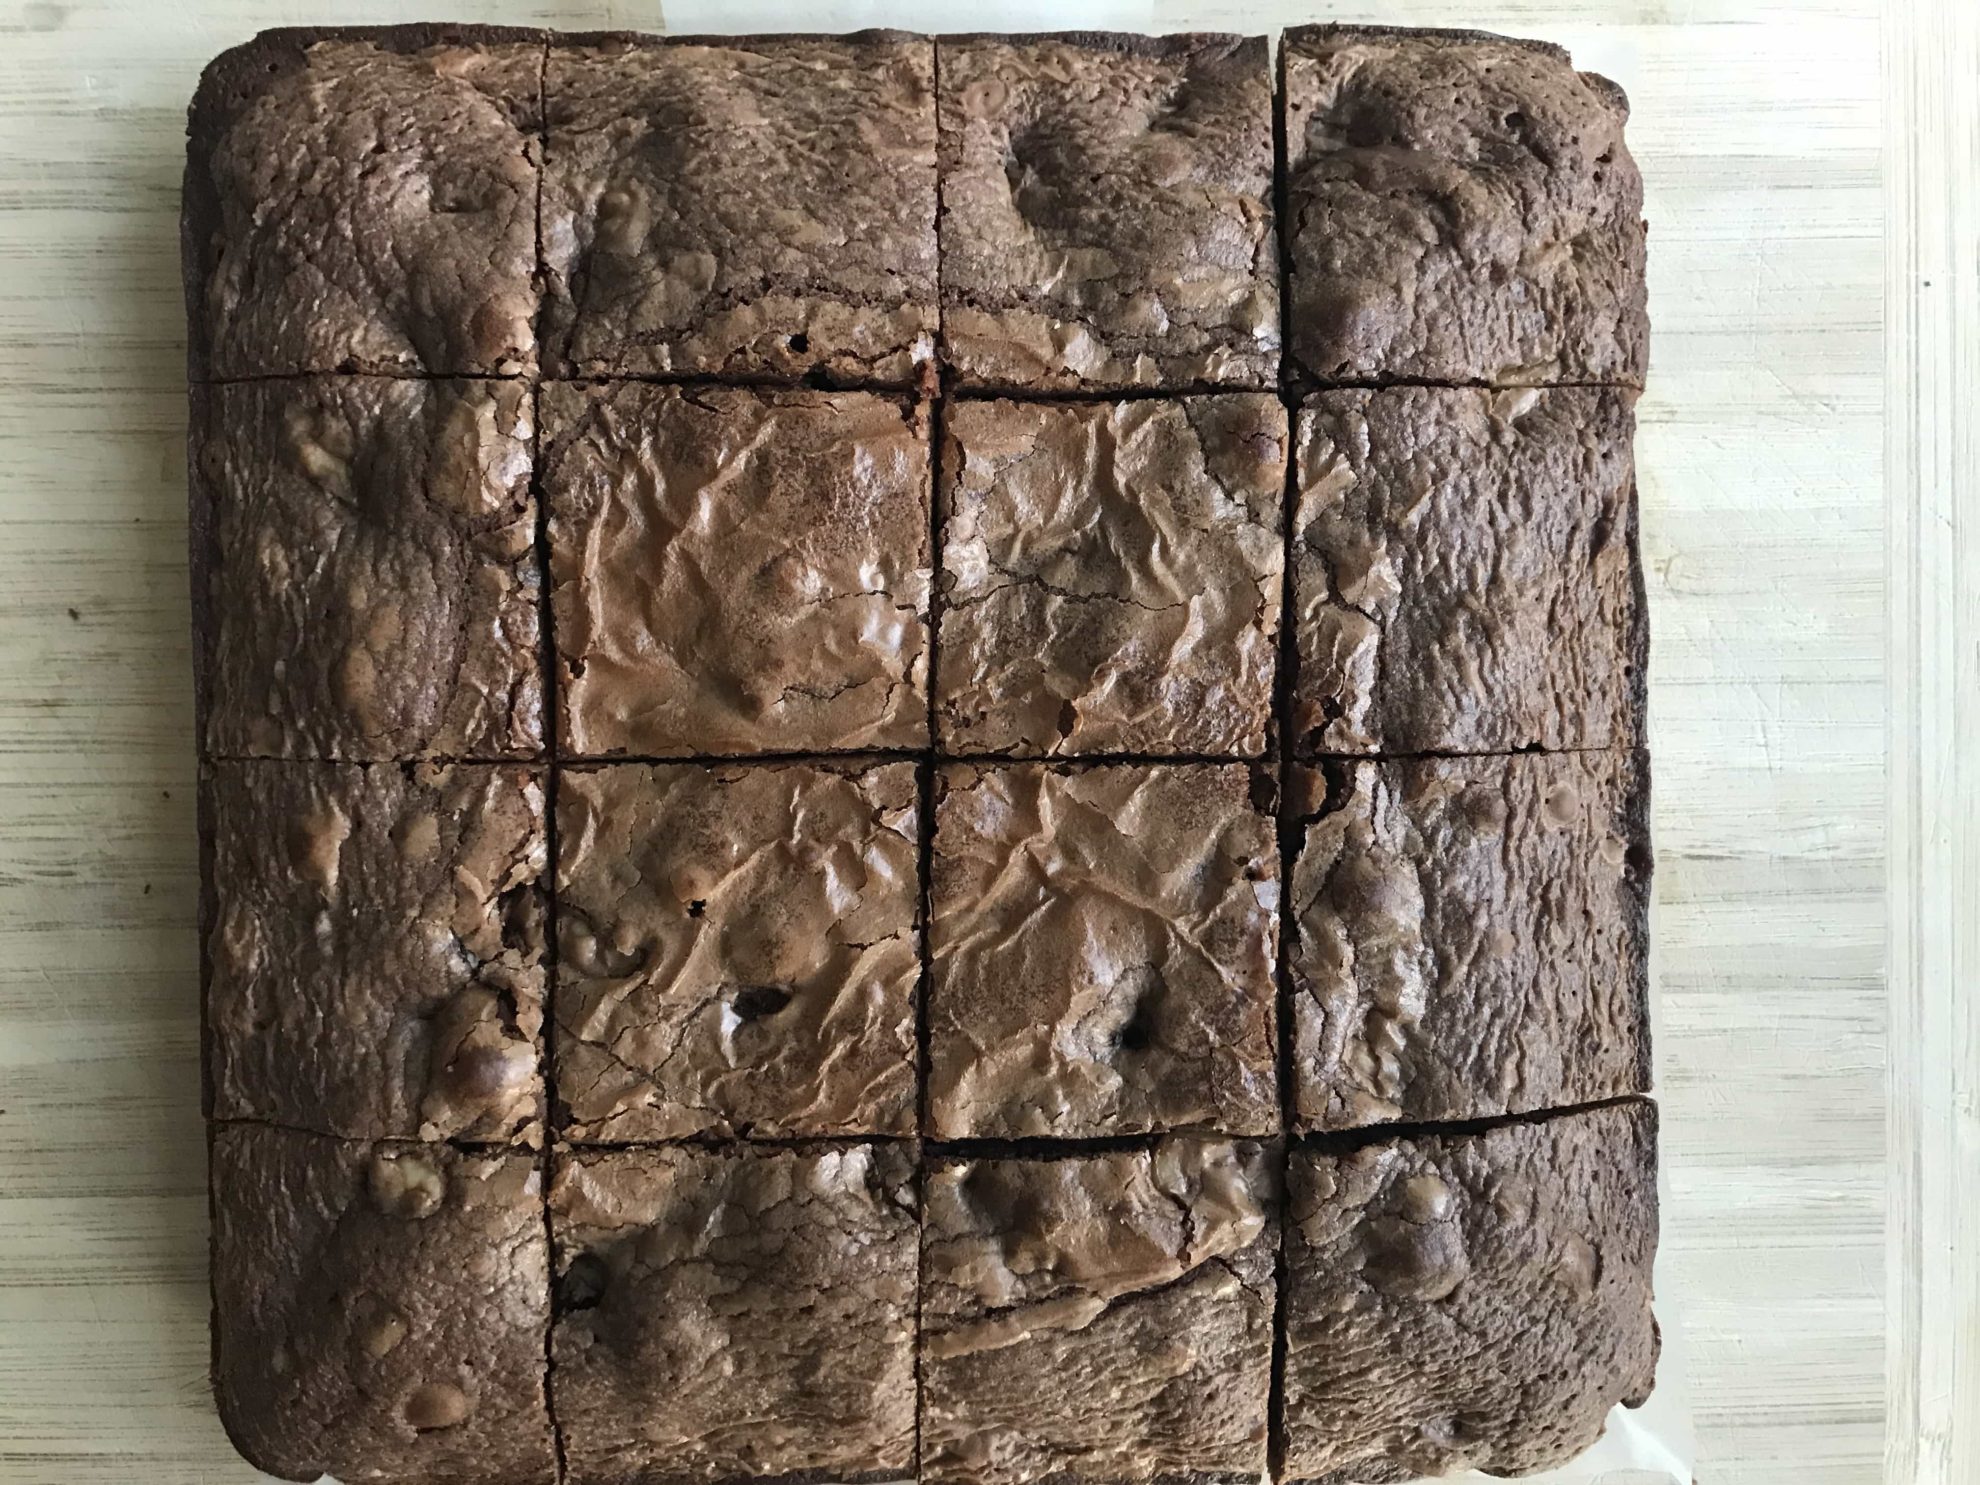 Bakes brownies cut into 16 squares